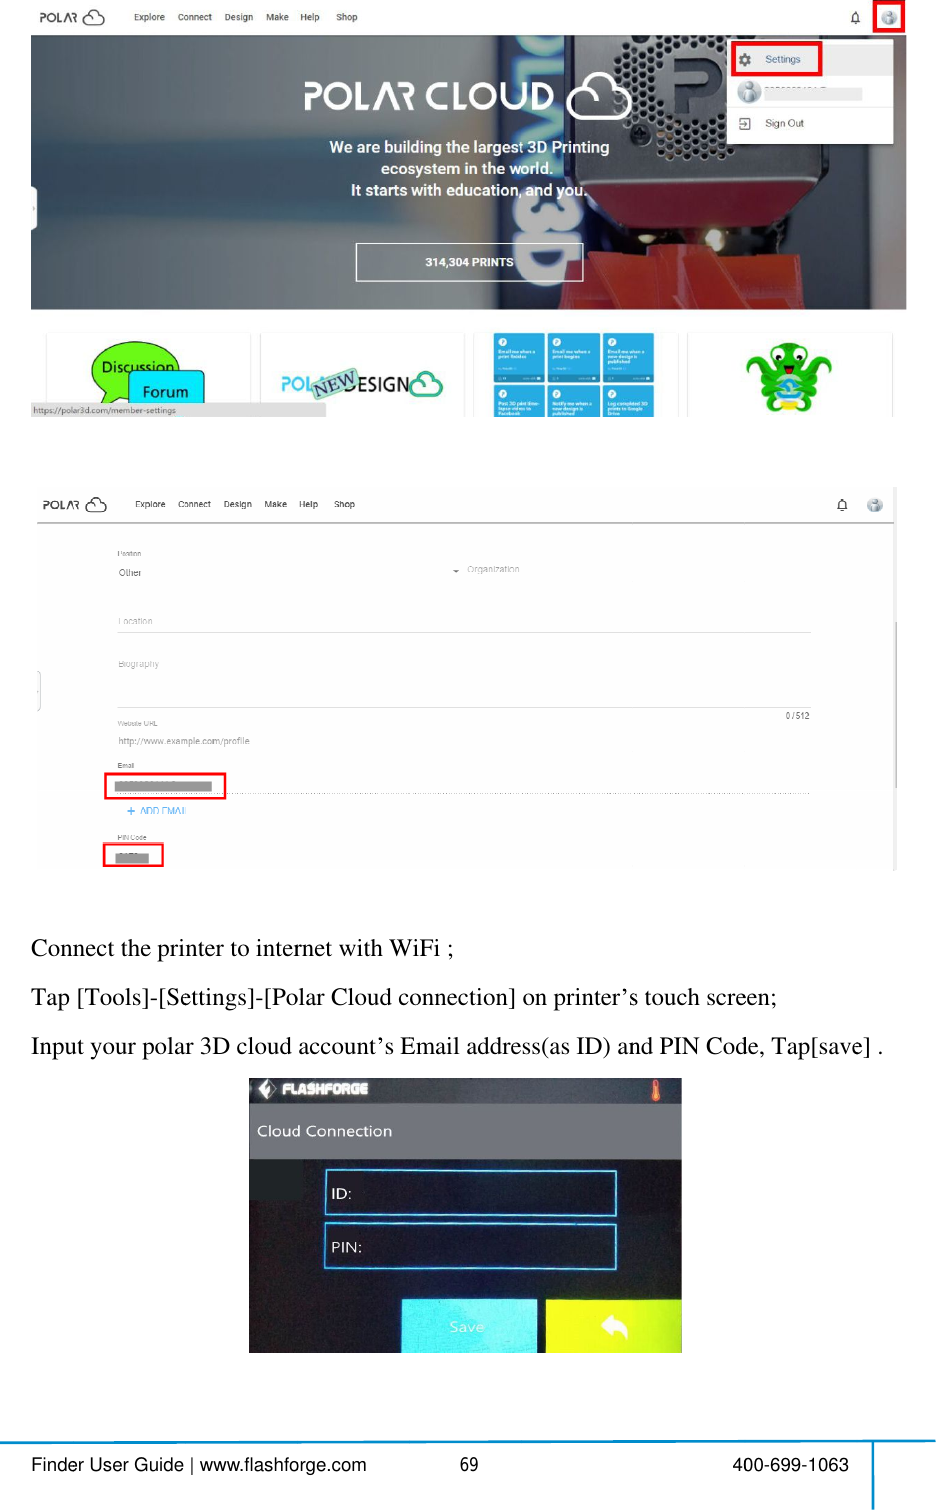  FindeConnecTapInpunder User Guideonnectthepri[Tools]-[Senput yourpola|www.flashfontertointerSettings]-[Poar 3D cloud accountorge.com                                    4rnetwithWPolarCloudcd accountsE                                    469WiFi ;onnection]Email addre                                    4onprintersss(asID) an                                    40stouch scrend PINCode, Tap00-699-1063een;ode, Tap[savesave] .